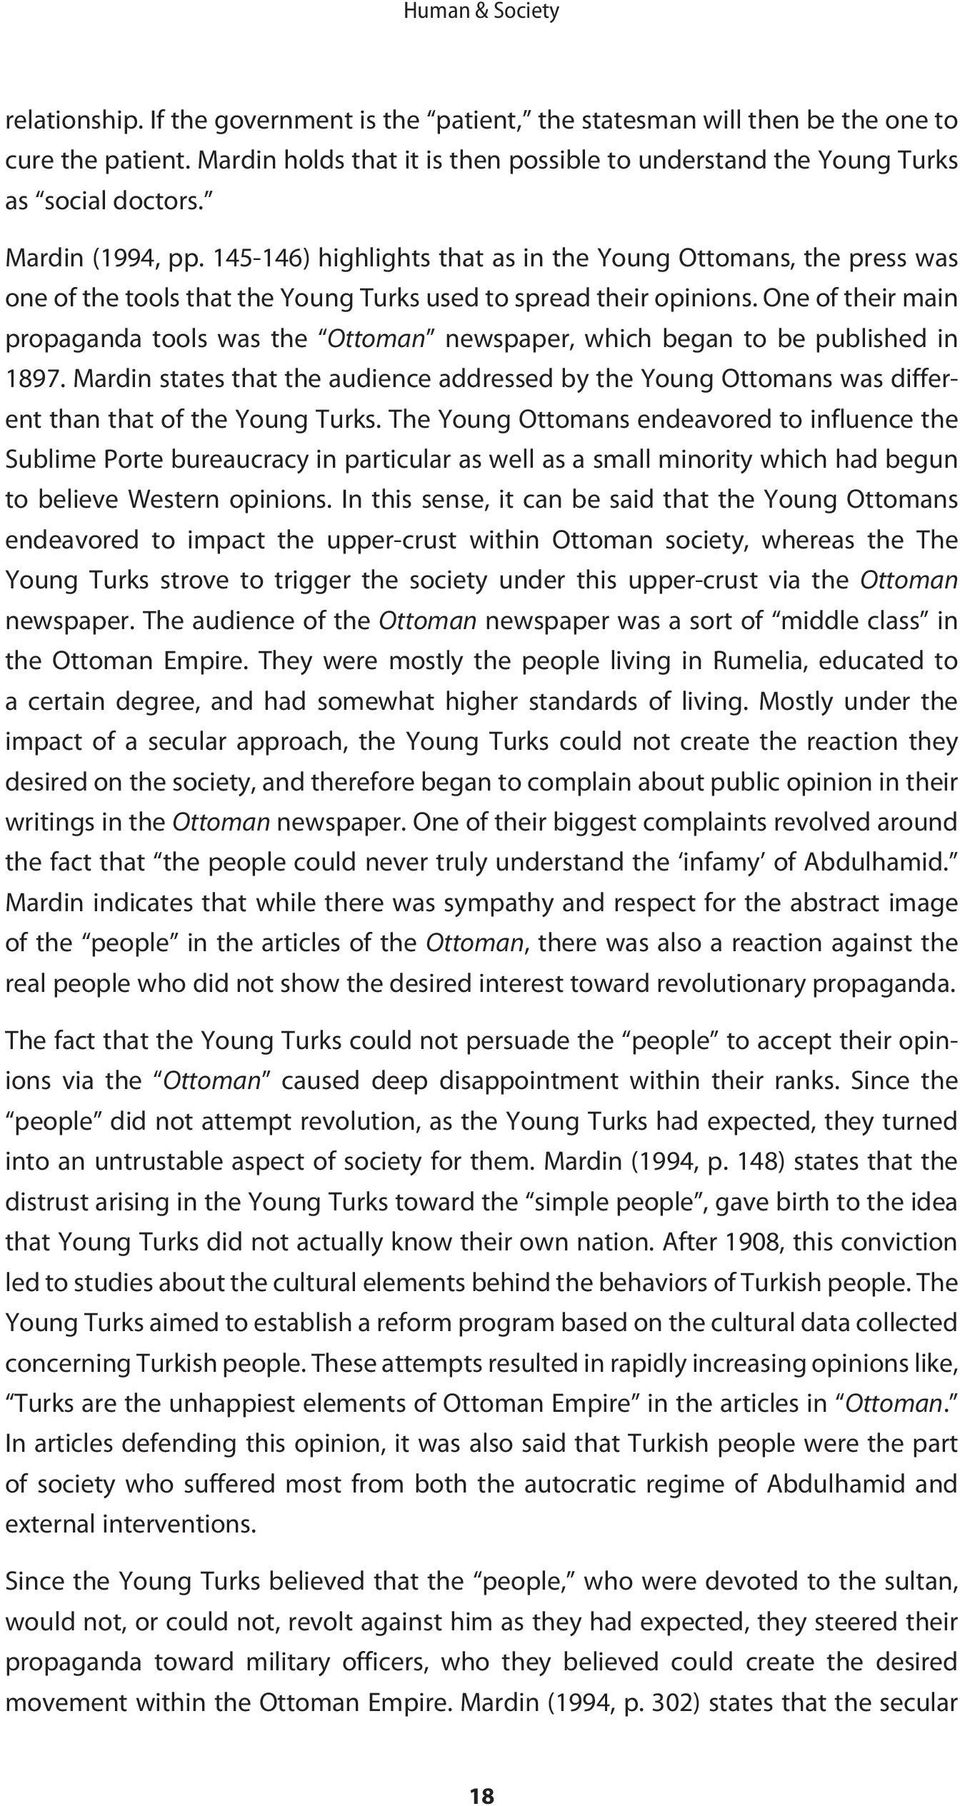 145-146) highlights that as in the Young Ottomans, the press was one of the tools that the Young Turks used to spread their opinions.